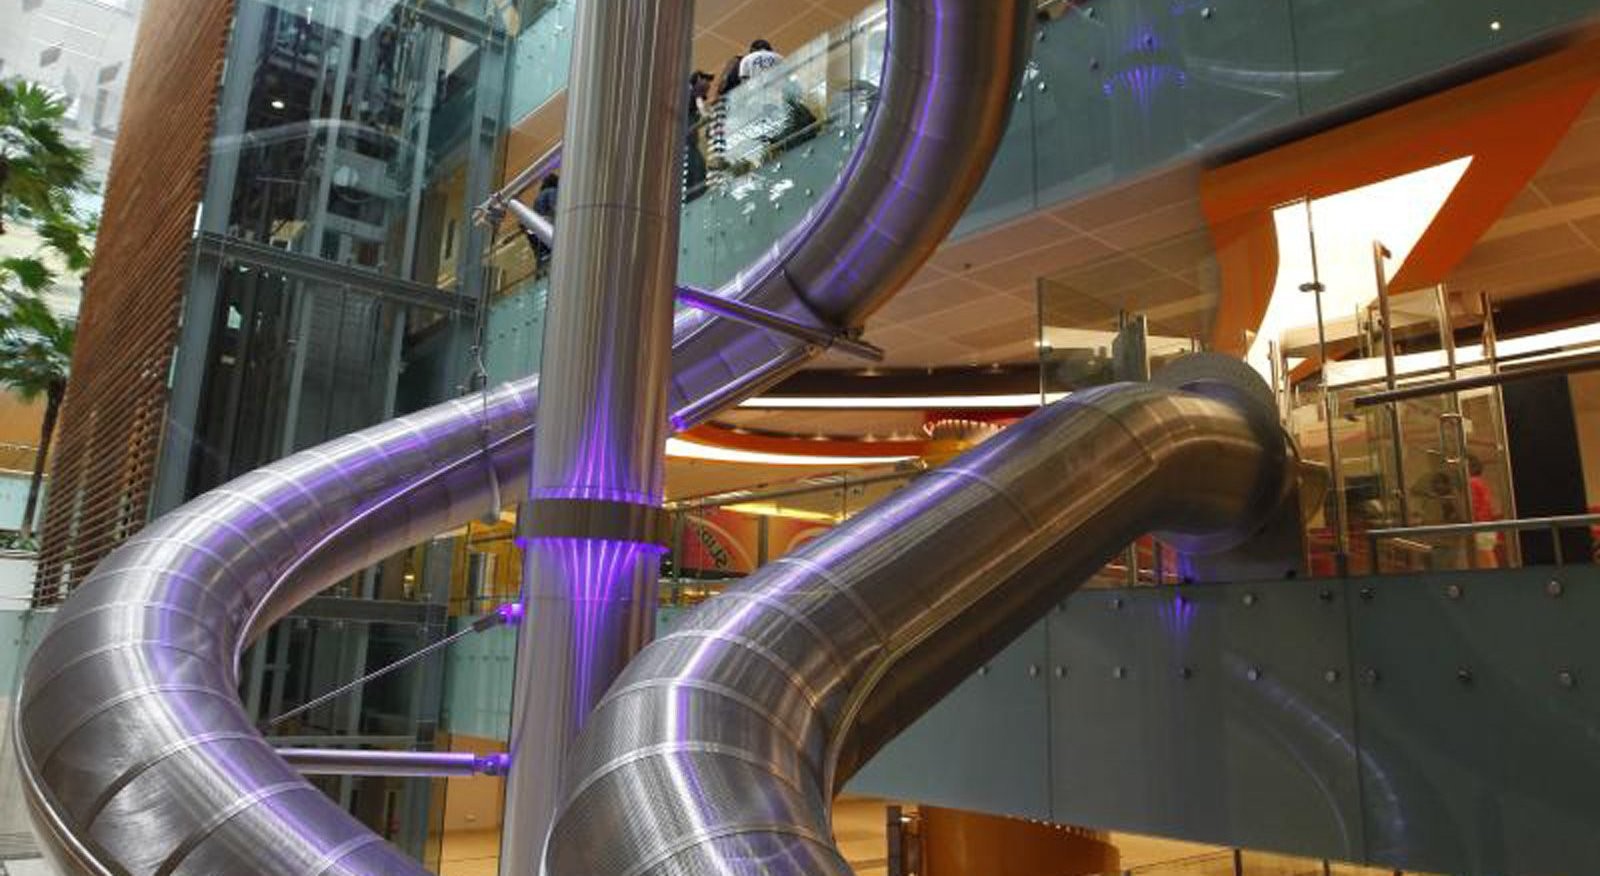 Singapore’s Changi Airport offers two slides for passengers to use – one in Terminal 4, and another in Terminal 3. Photo: Luxurylaunches